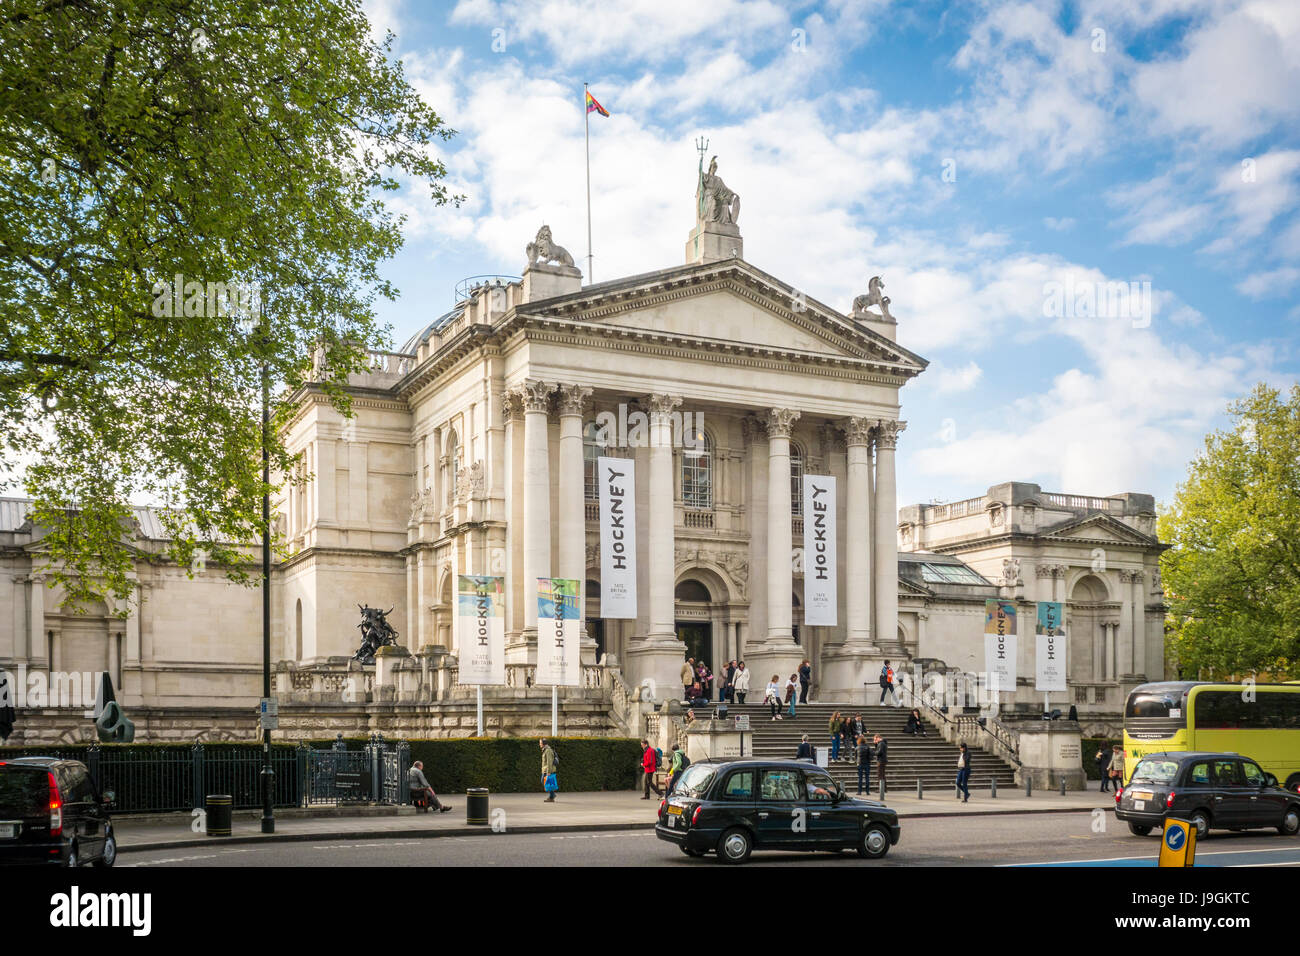 Banners for the Hockney exhibition outside Tate Britain viewed from Millbank, London, UK Stock Photo